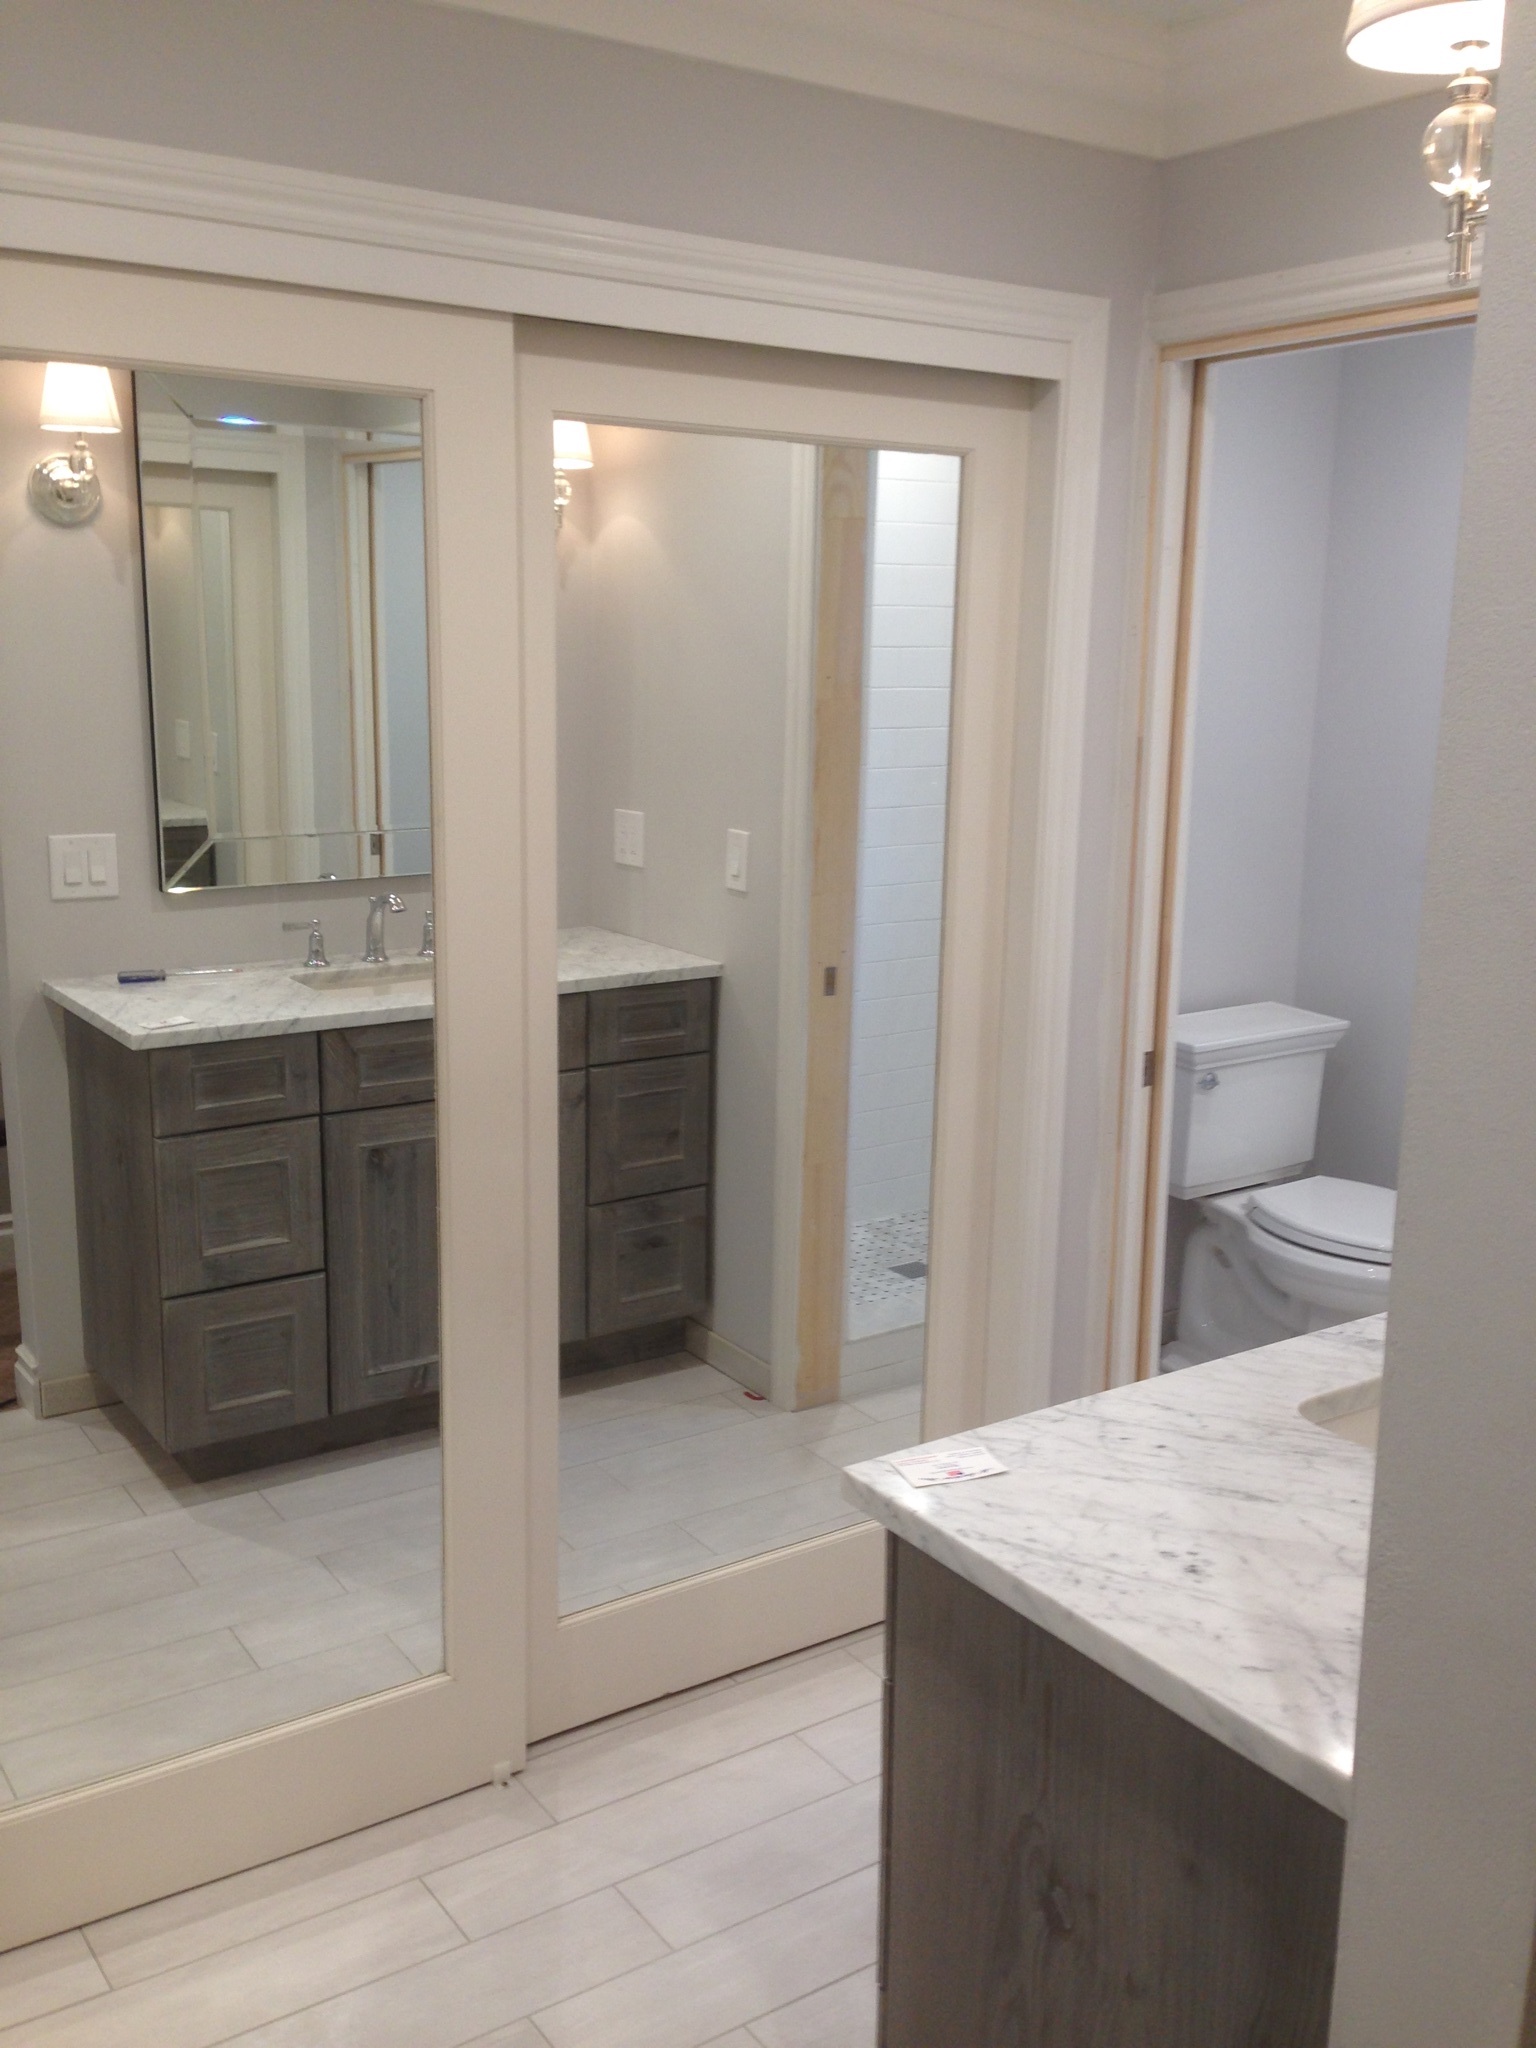 Outdated Master Bathroom Opens Up With, Bathroom Closet Doors